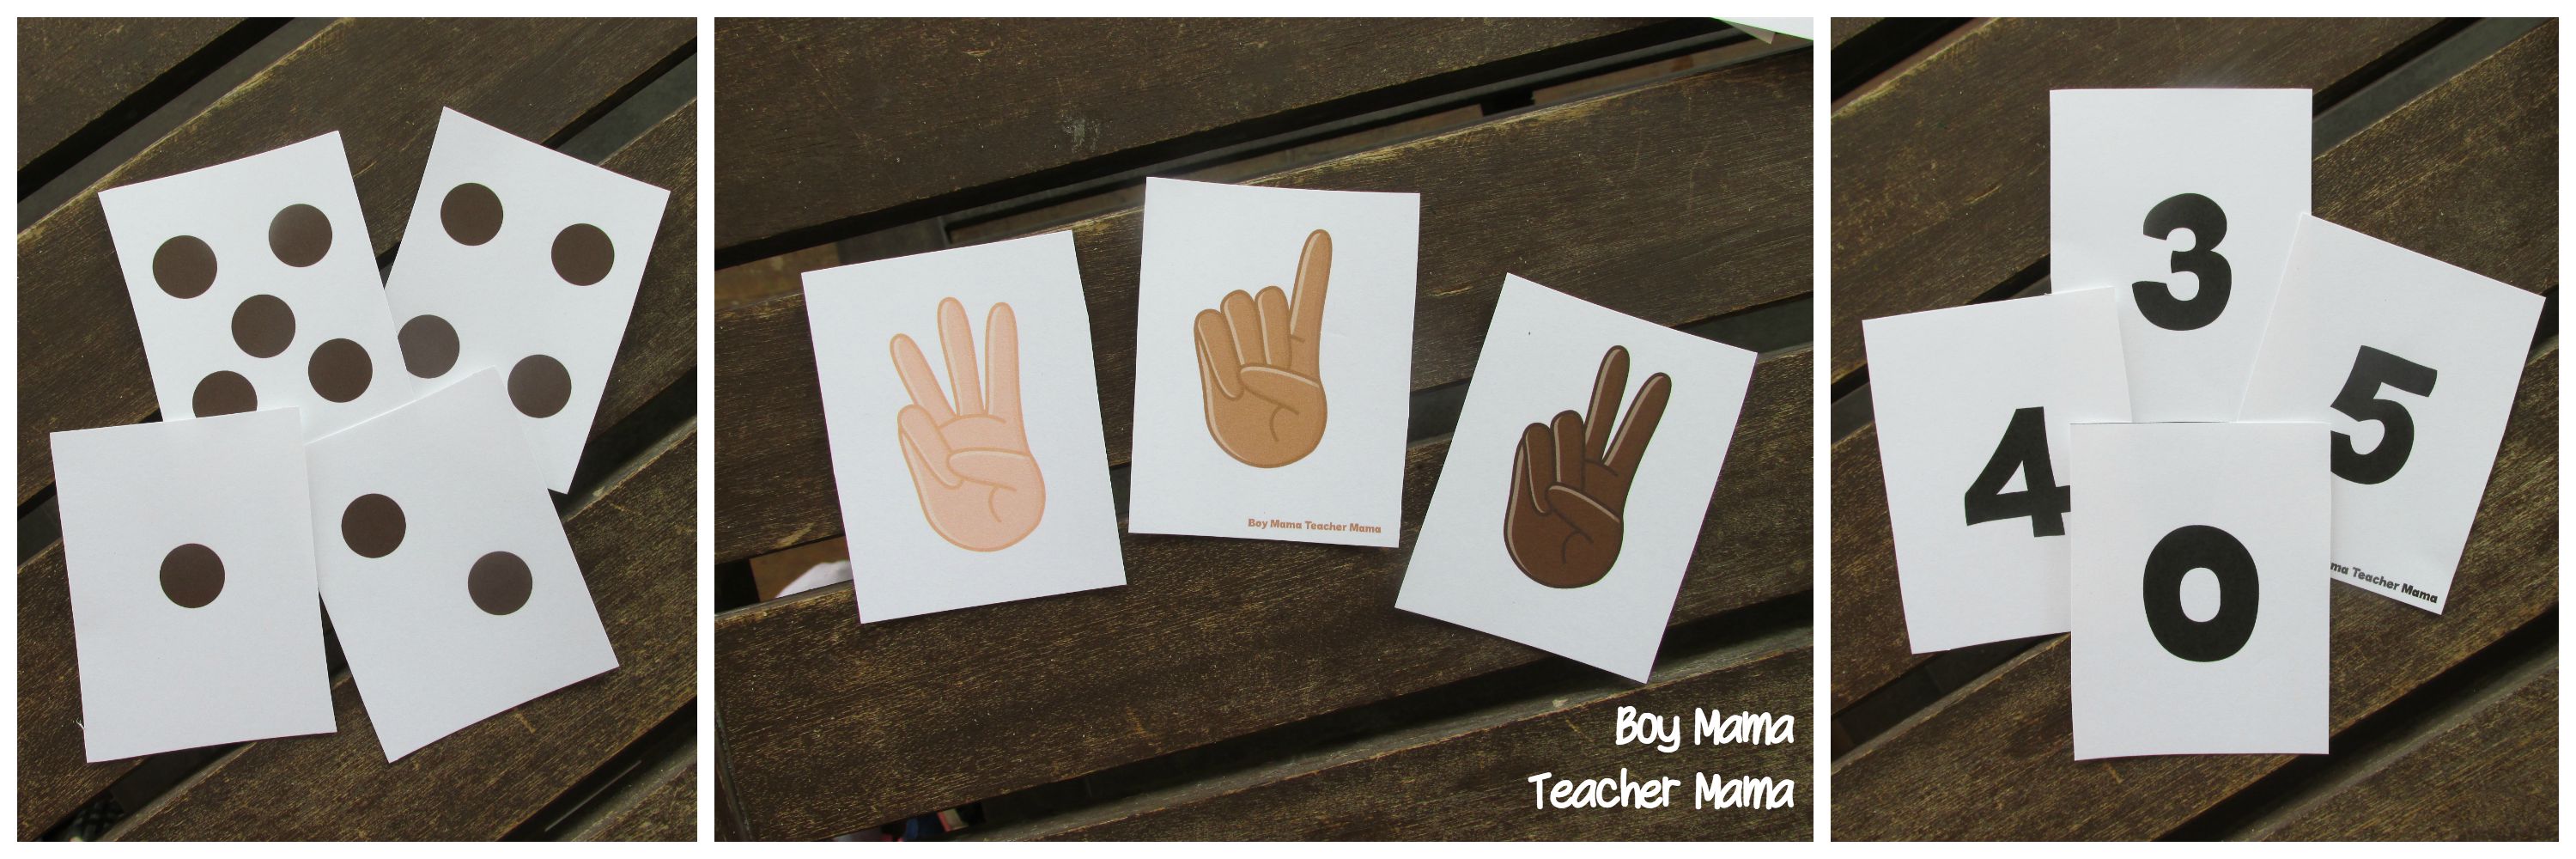 Teacher Mama: Finger Counting Memory Game for Subitizing {After School